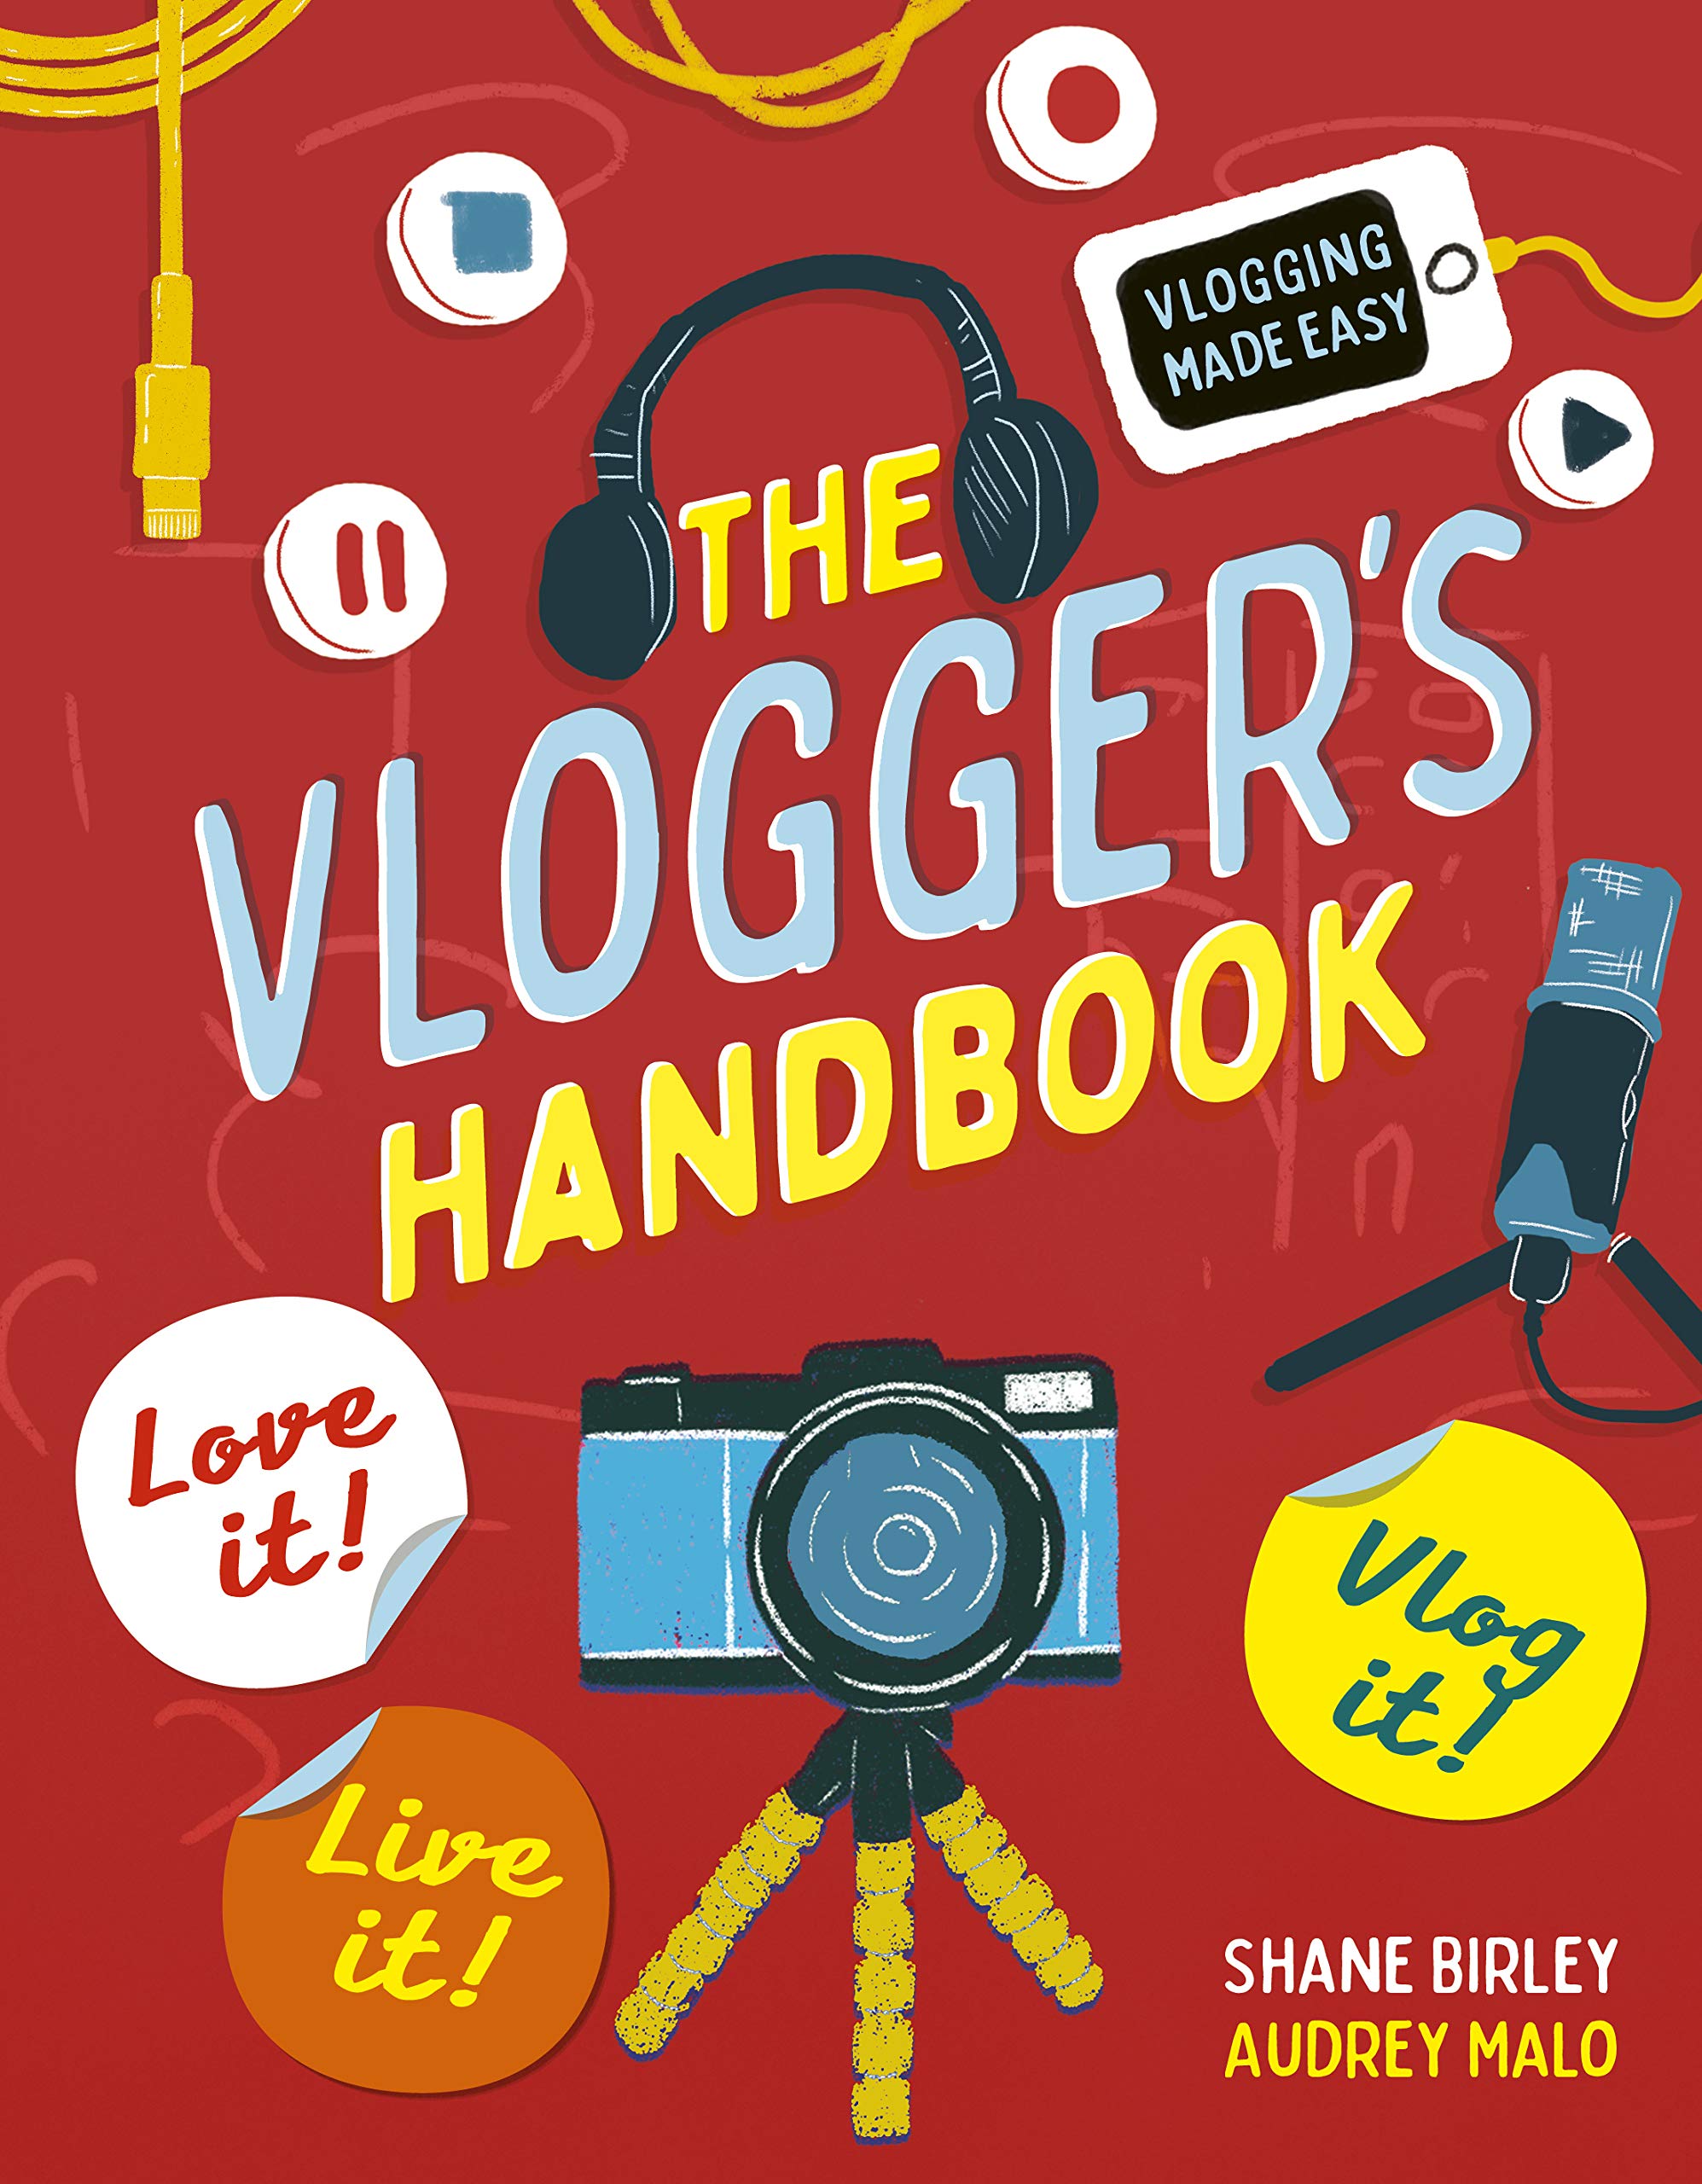 The Vlogger